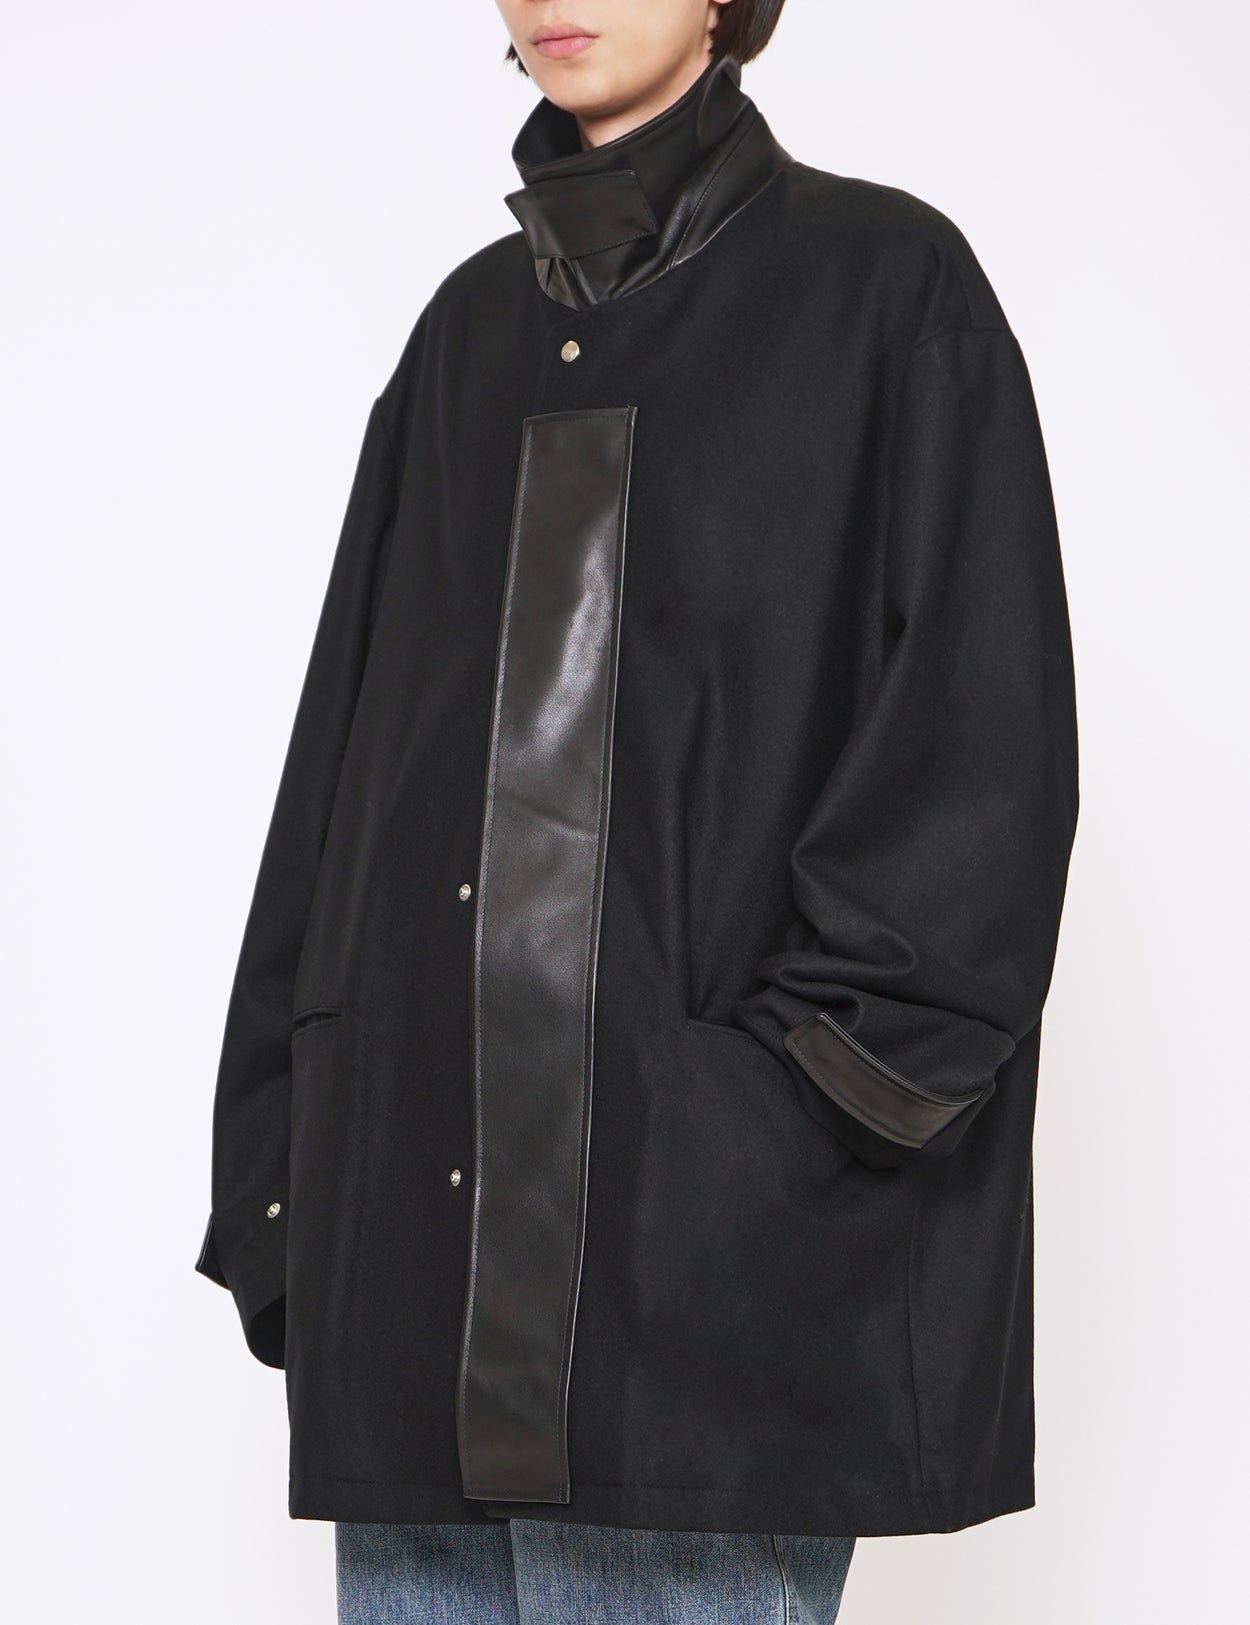 BLACK LEATHER FLY FRONT LONG JACKET